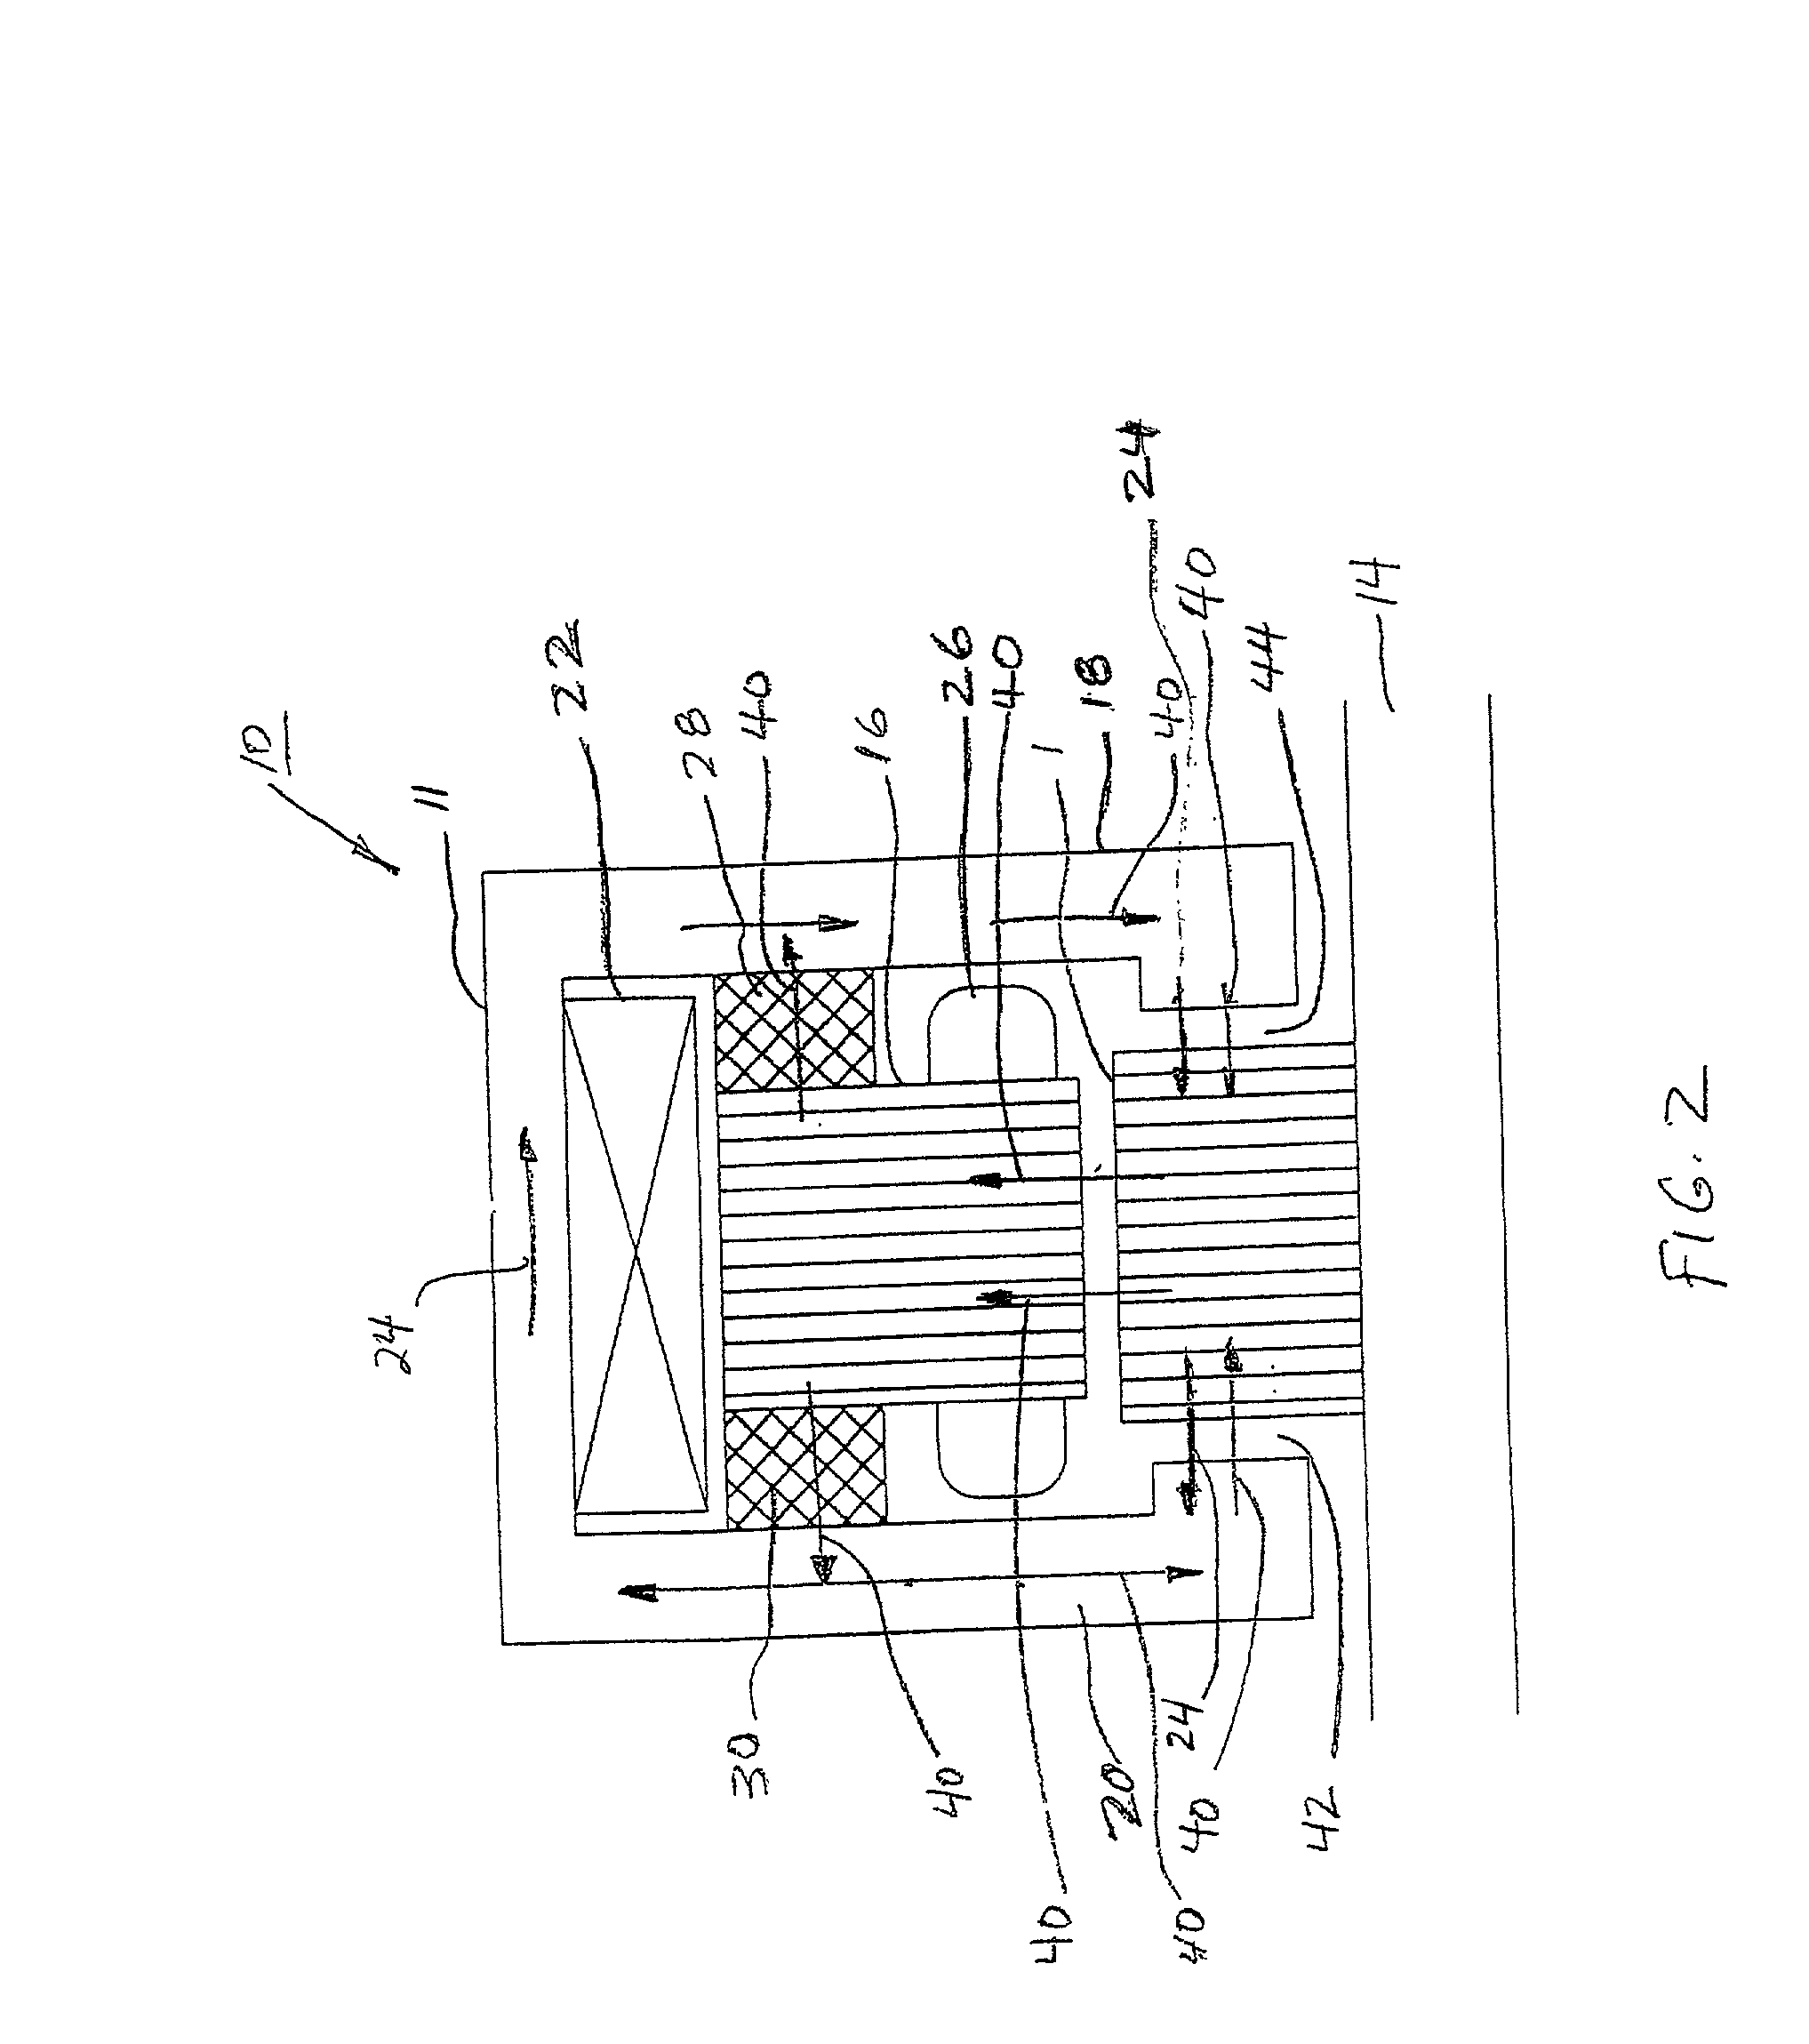 Method and apparatus for providing three axis magnetic bearing having permanent magnets mounted on radial pole stack